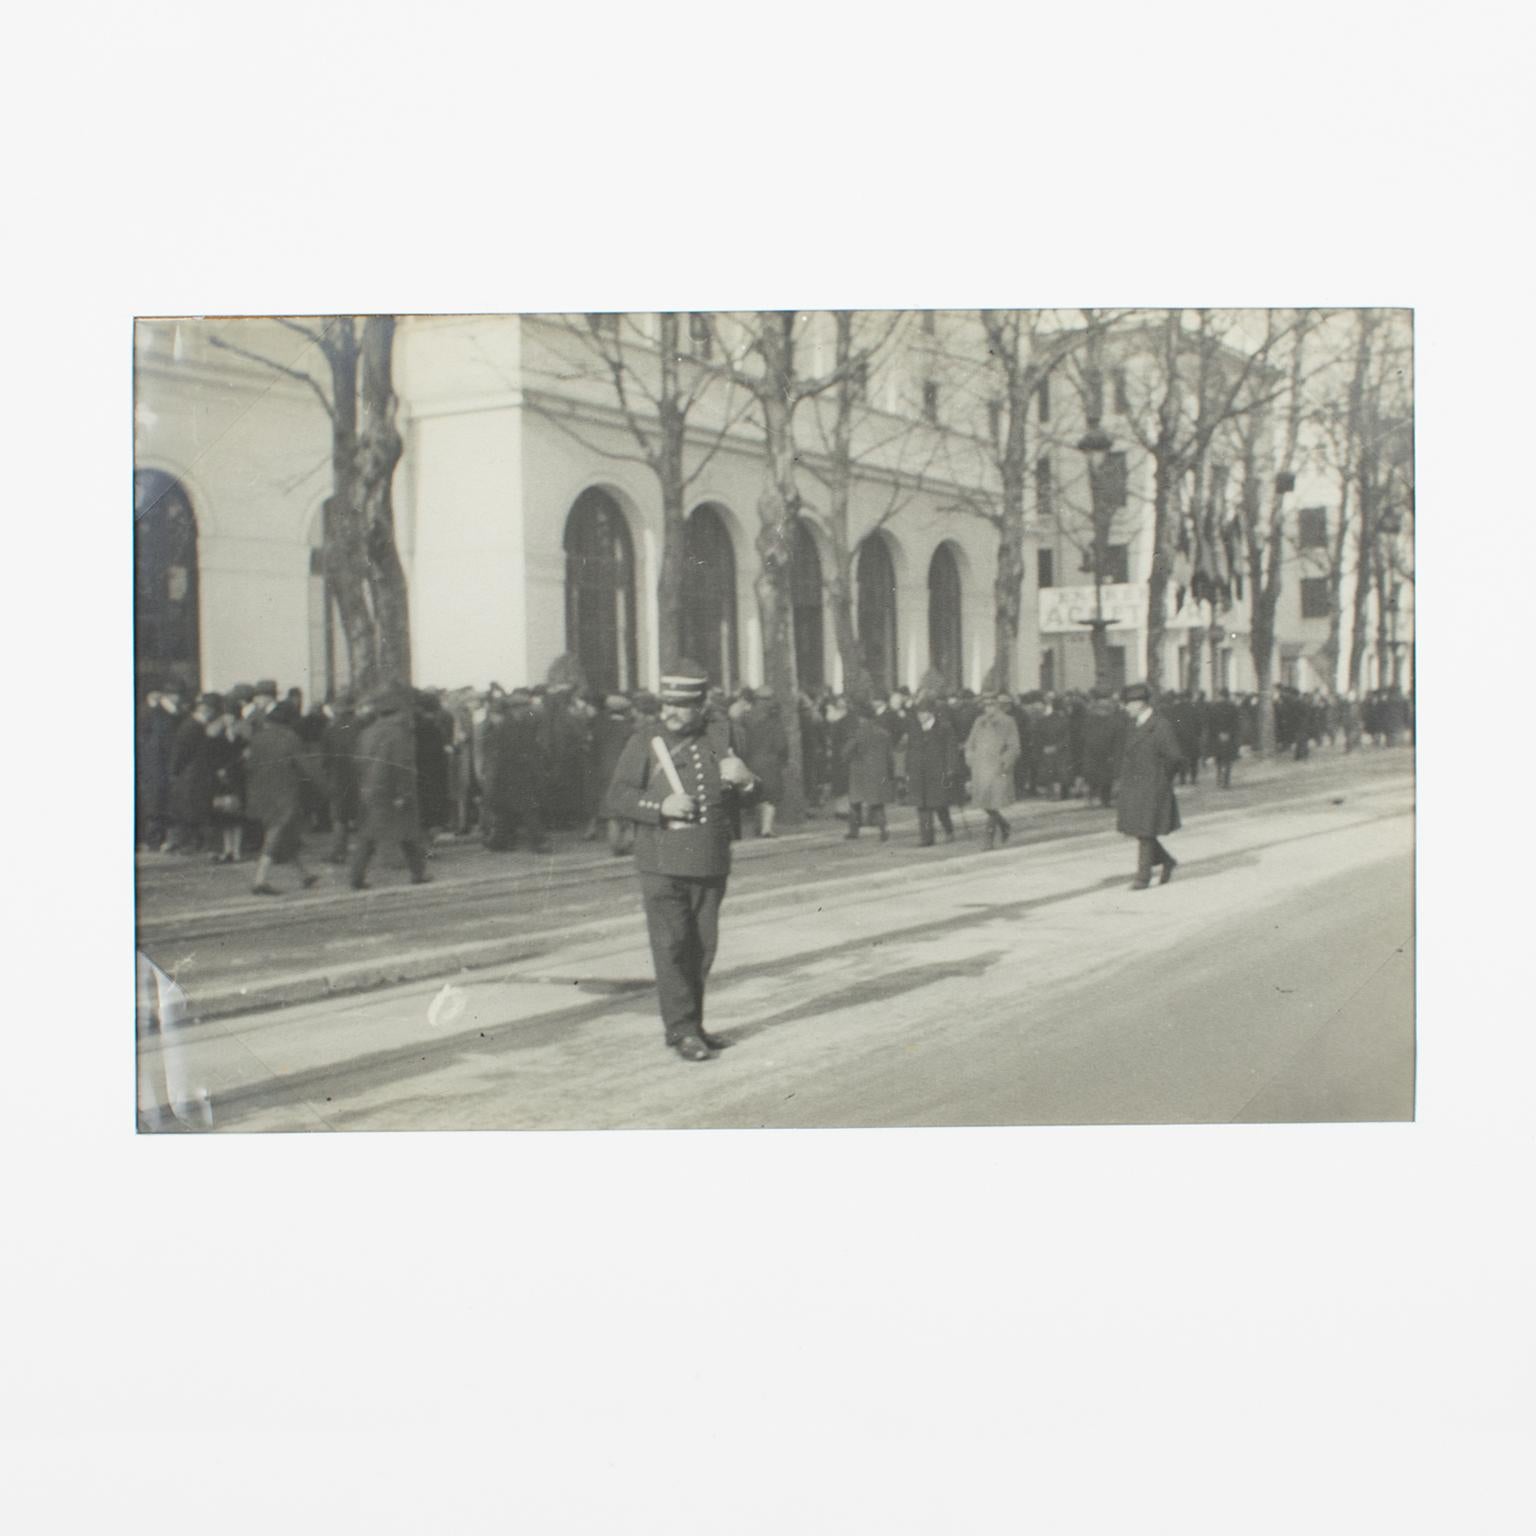 A unique original silver gelatin black and white photography. The International Autumn Fair in Lyon, France, 16th of March 1927. 
The crowd rushes to the entrance of The International Autumn Fair in Lyon on this first day of opening. In the